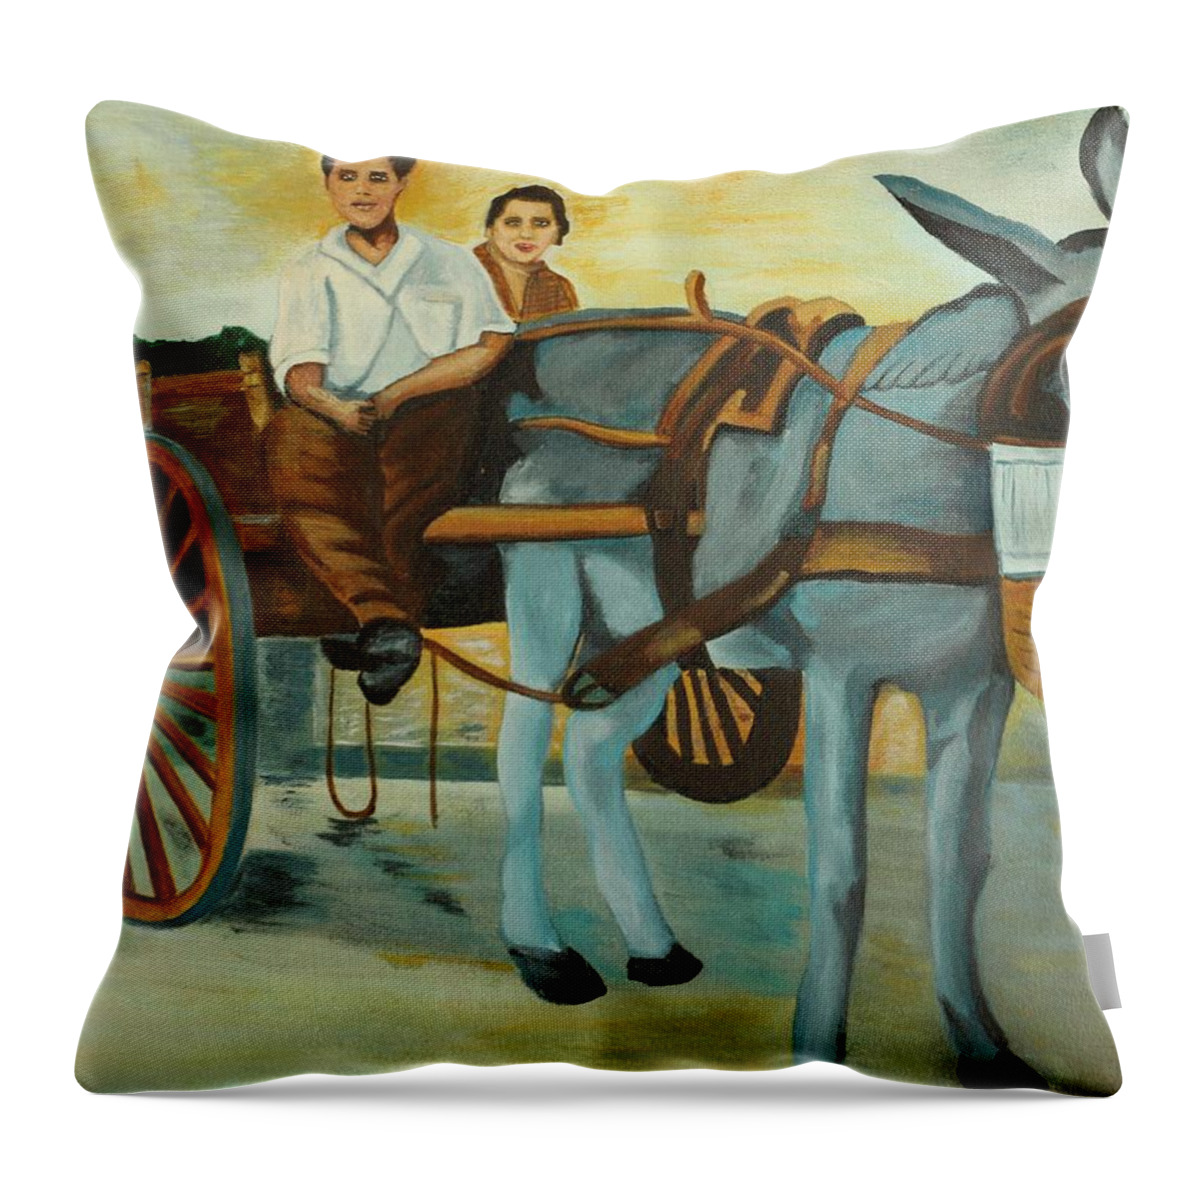 Donkey Throw Pillow featuring the painting Delivery Wagon by David Bigelow